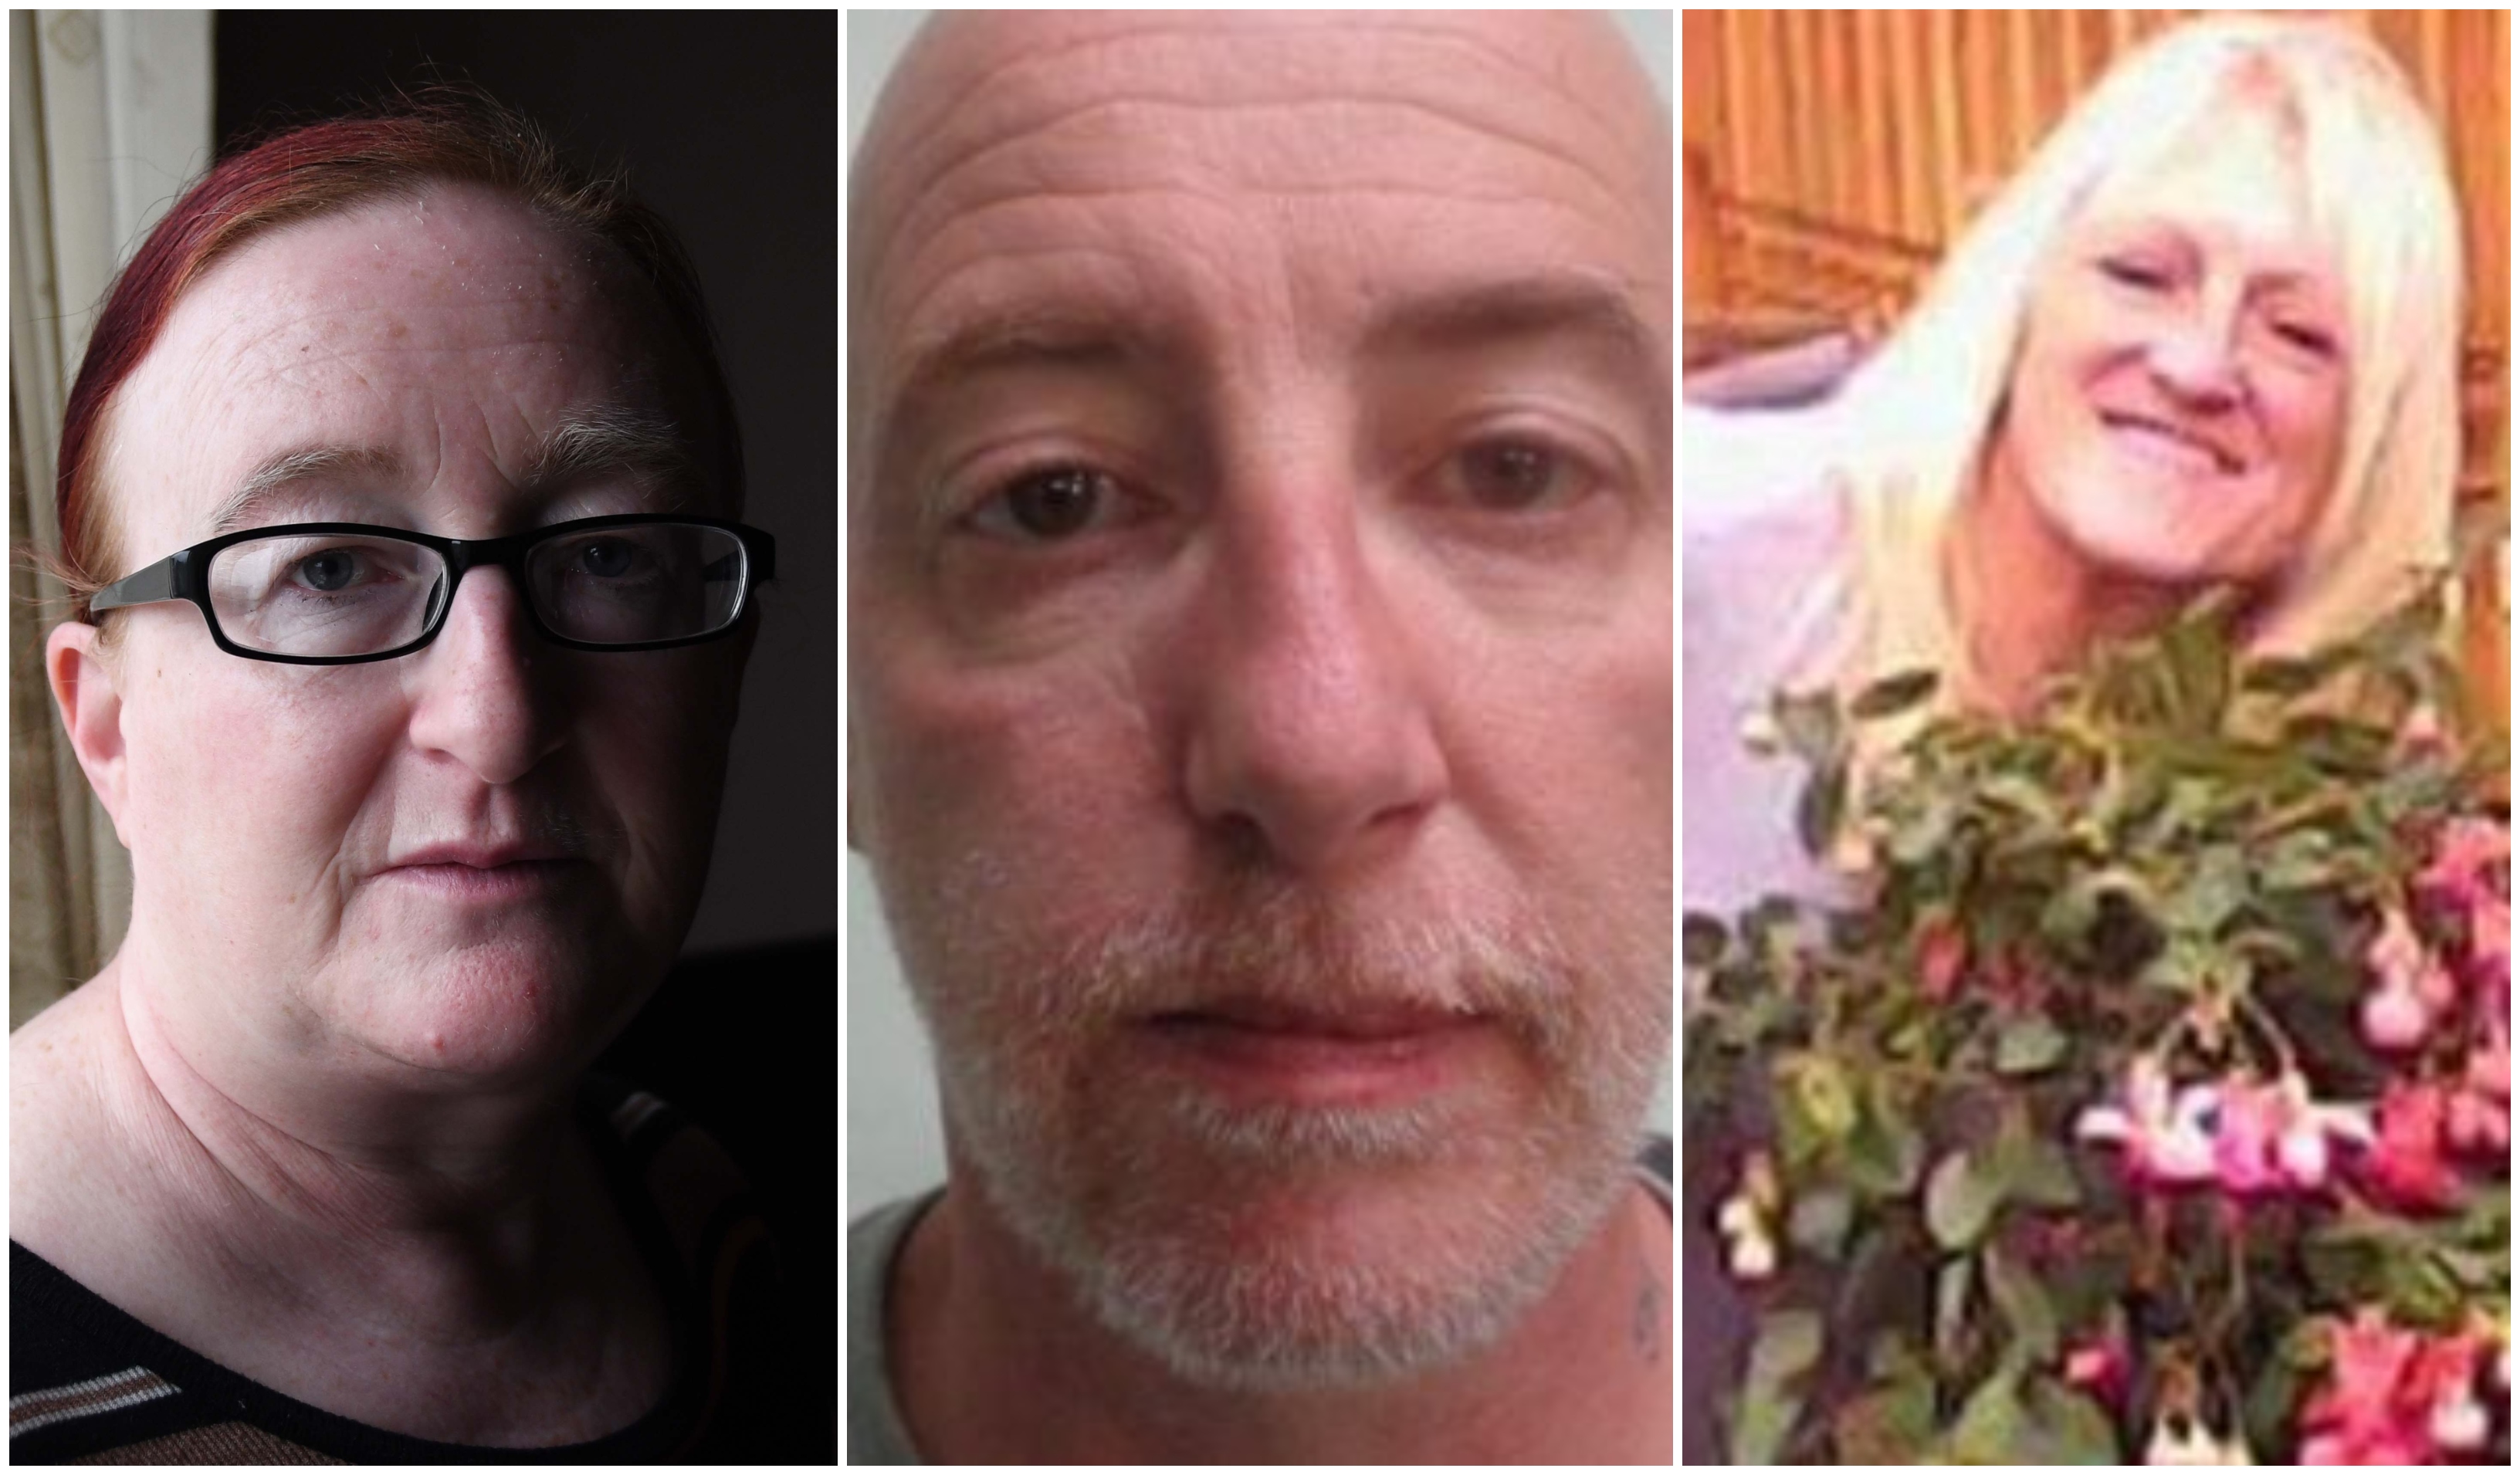 Michelle Cunningham, left, suffered years of abuse and physical attacks by Andrew Highton (centre) who went on to kill Linda Treeby (right)